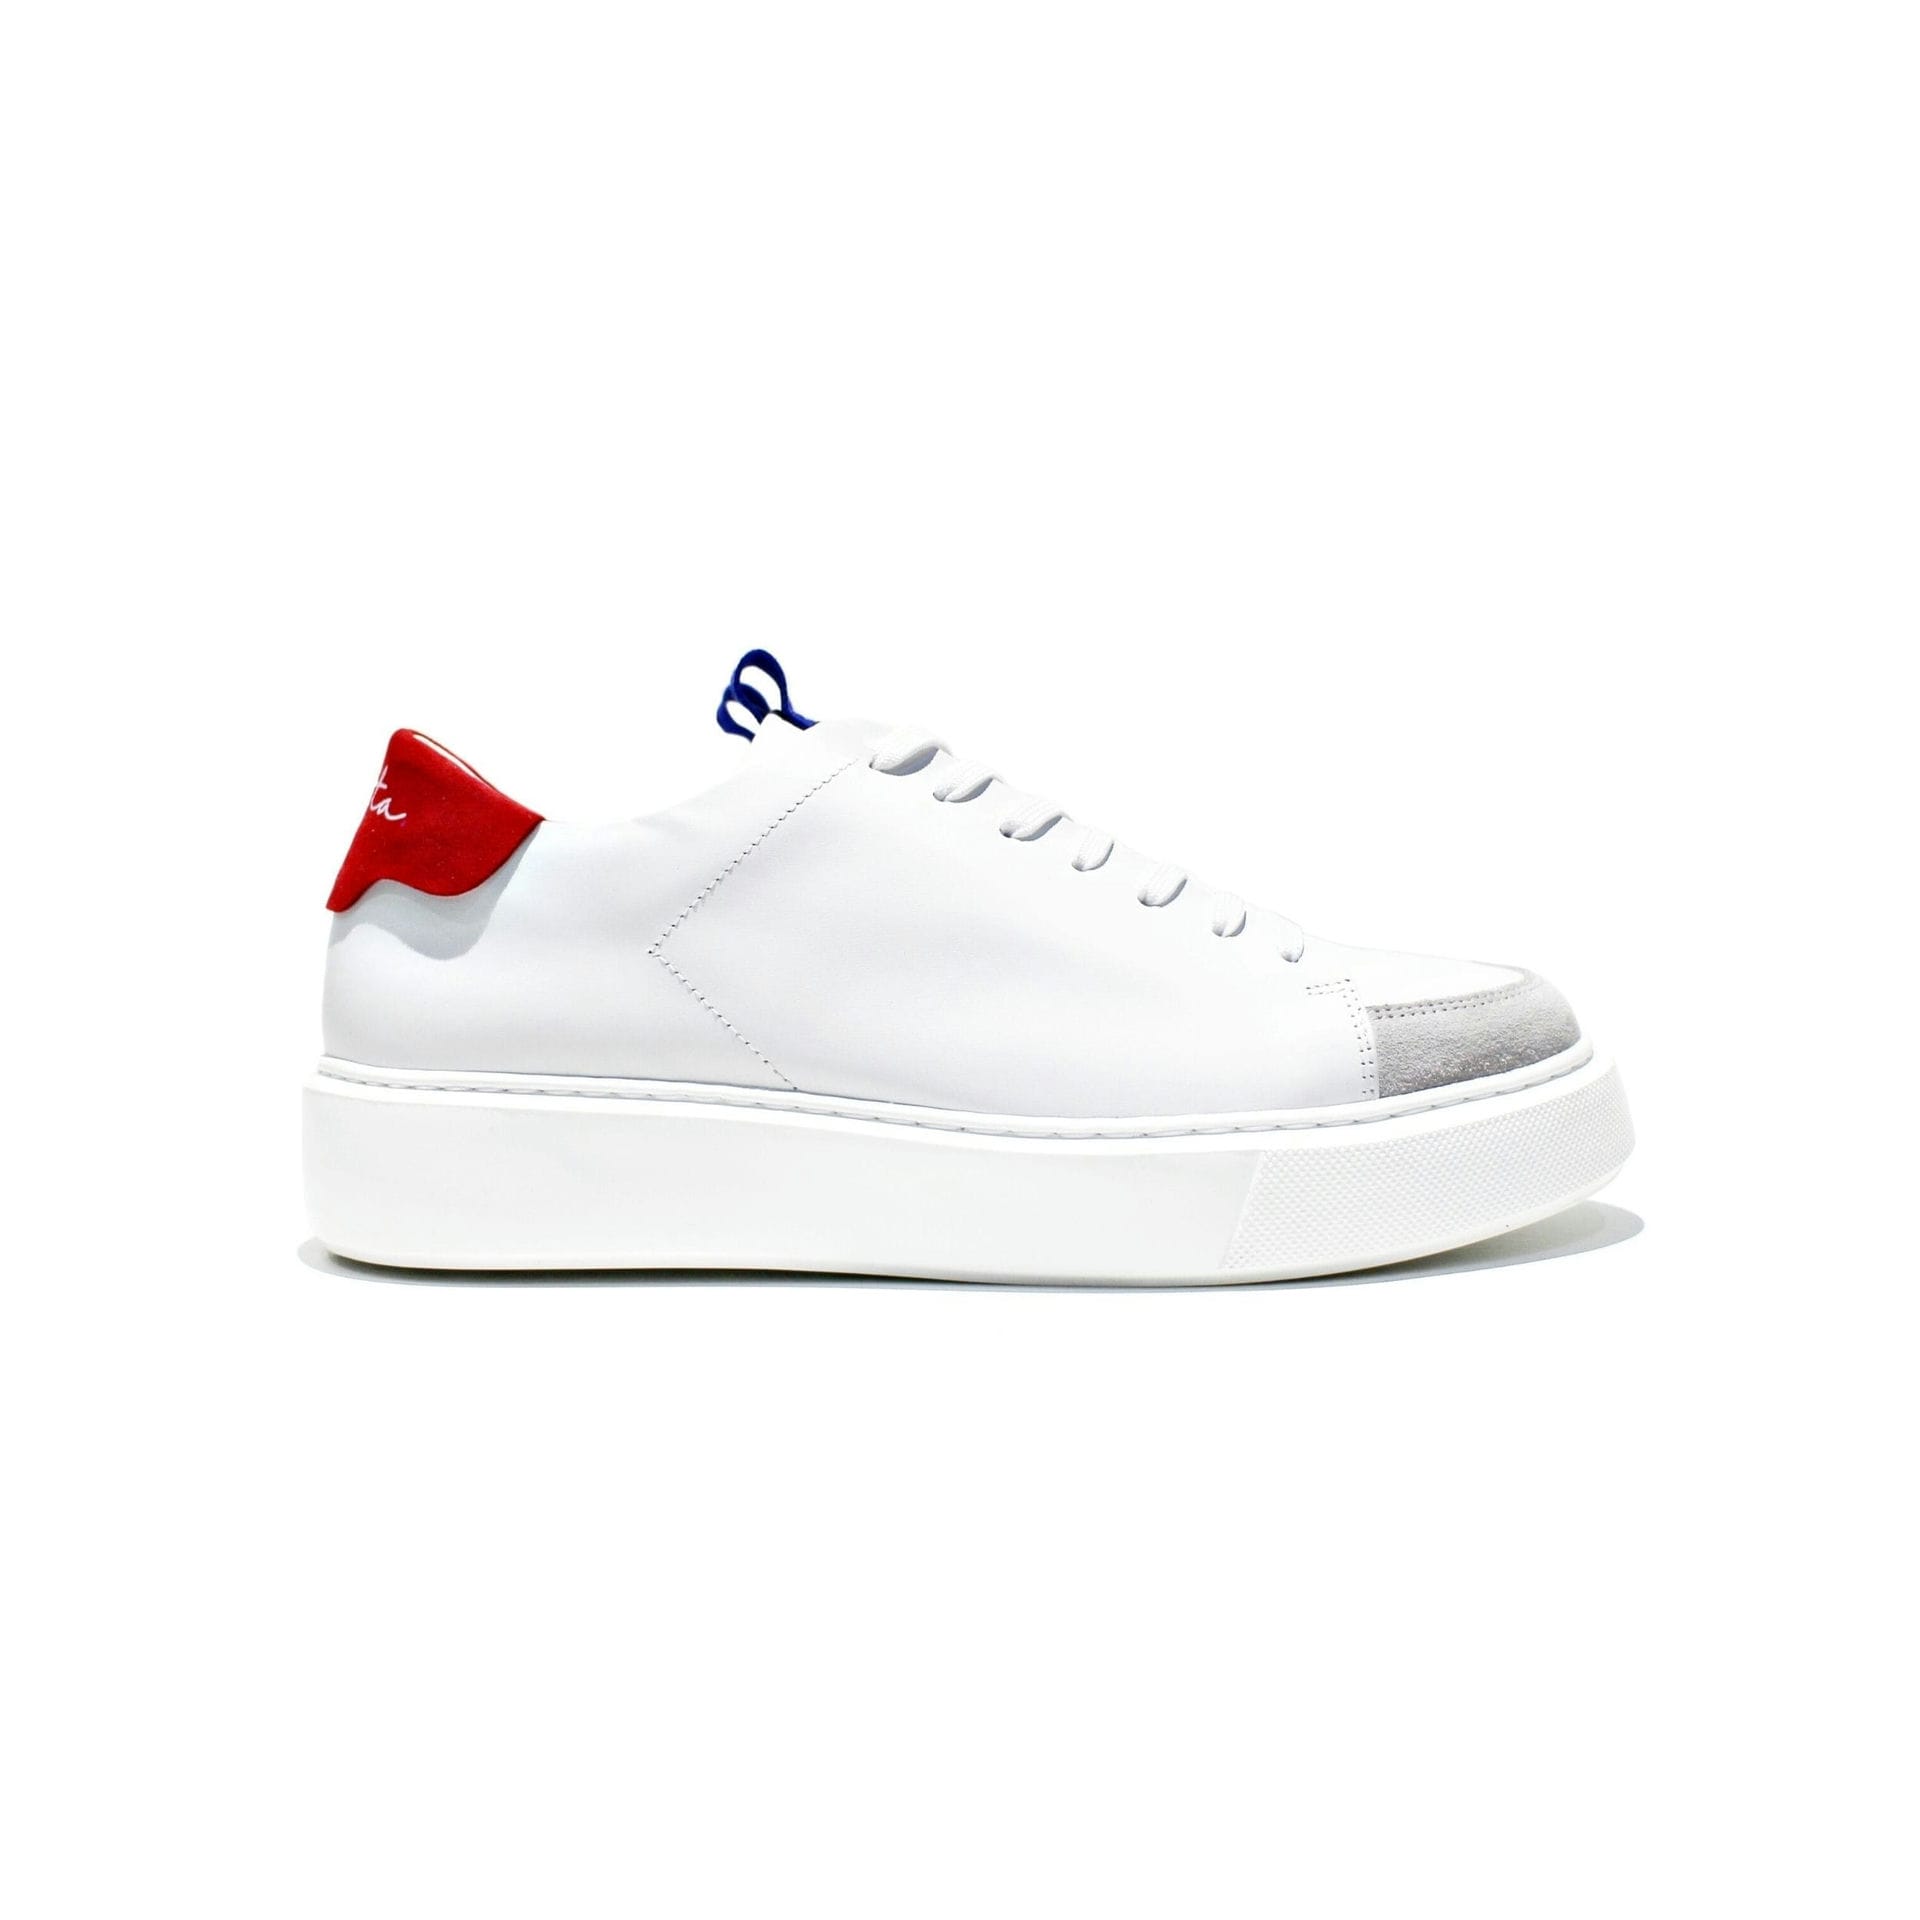 Paris Red is a model of a simple design sneaker, all built on high quality leather with EVA sole. Made toon in Portugal